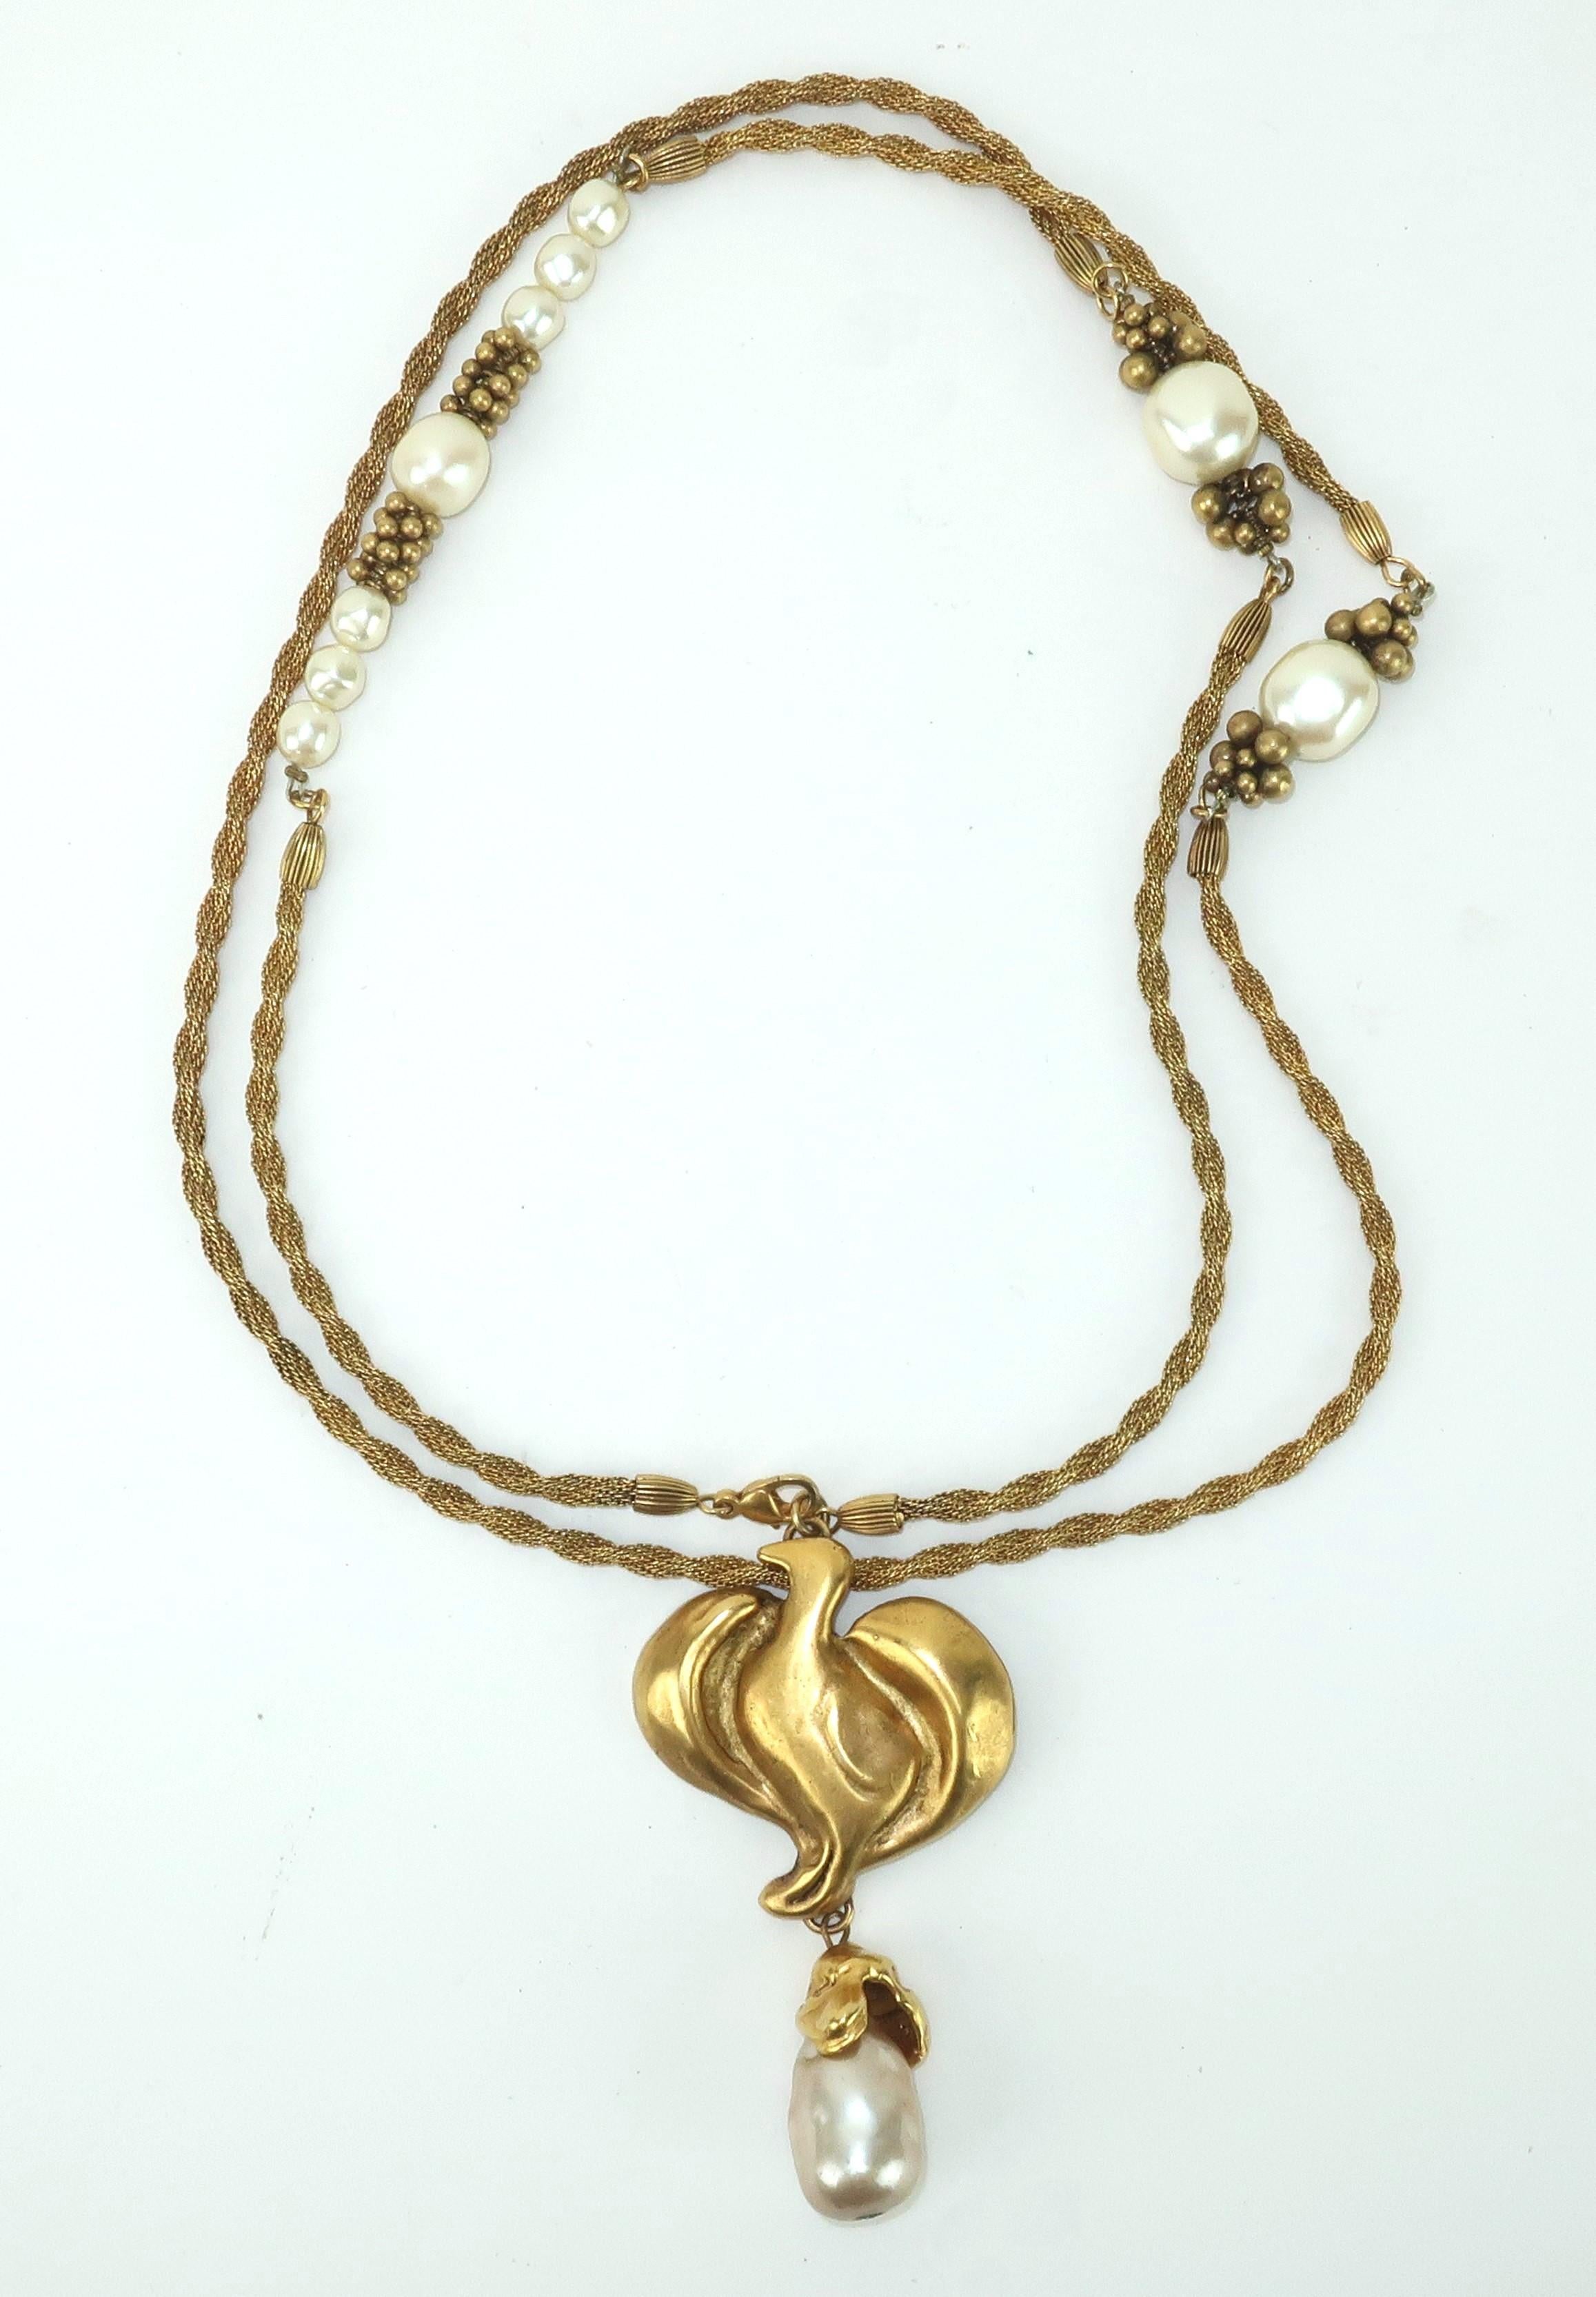 Modernist Donna Karan Attributed Gold Tone Bird Pendant Necklace With Baroque Pearls For Sale